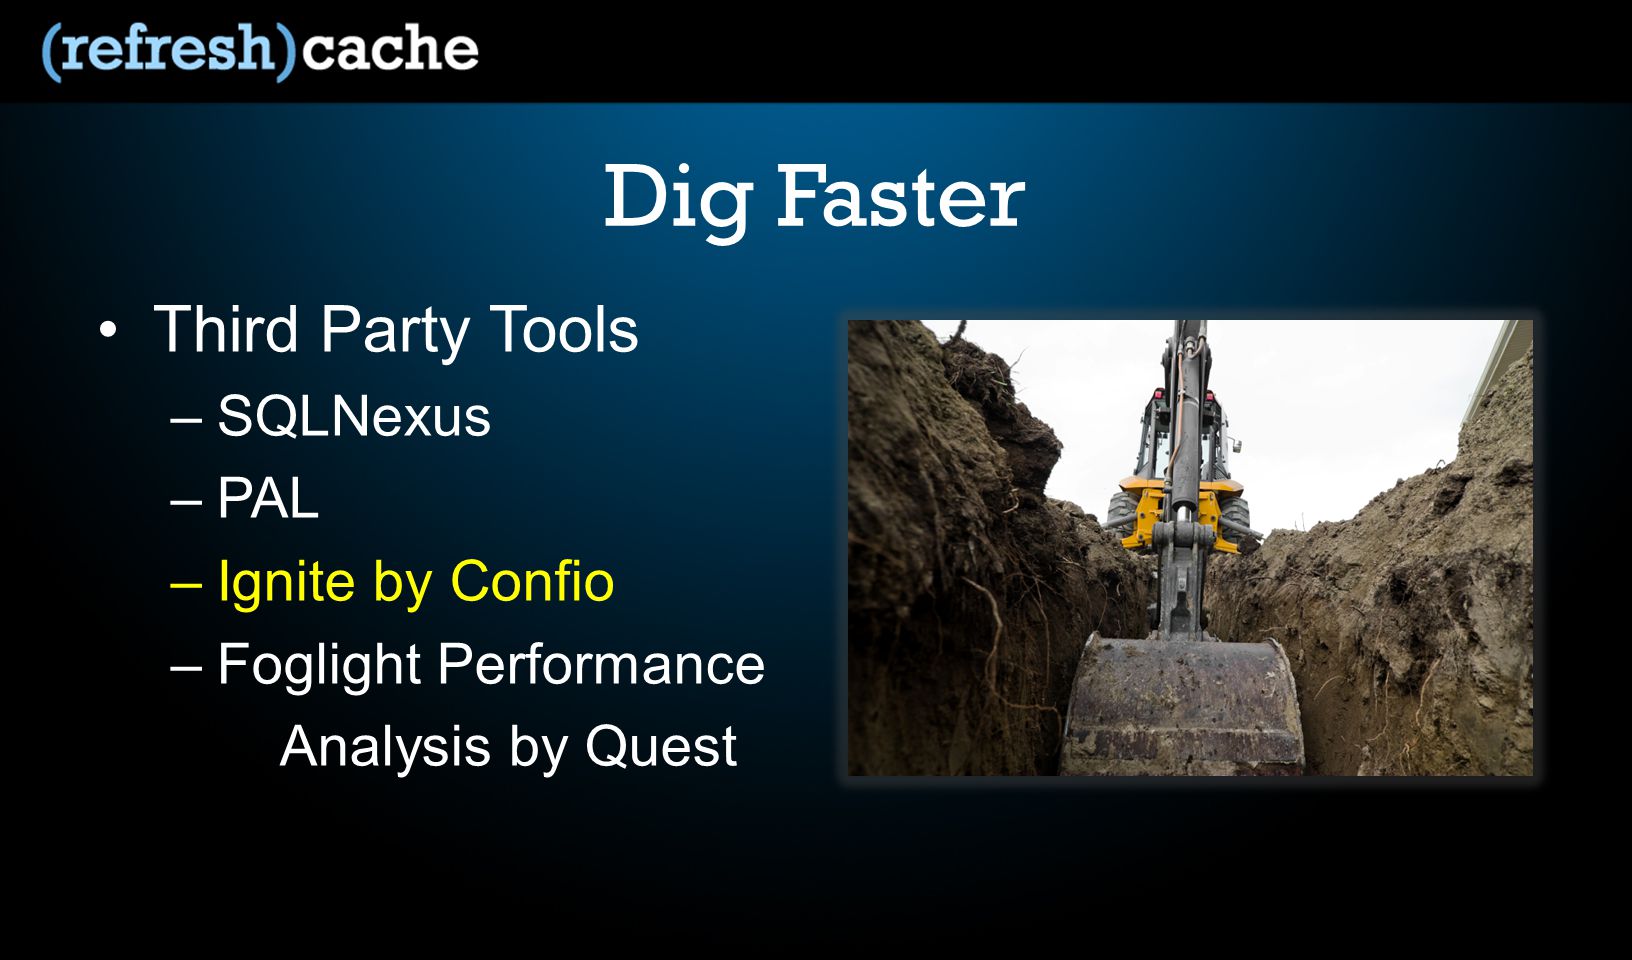 Dig Faster Third Party Tools –SQLNexus –PAL –Ignite by Confio –Foglight Performance Analysis by Quest